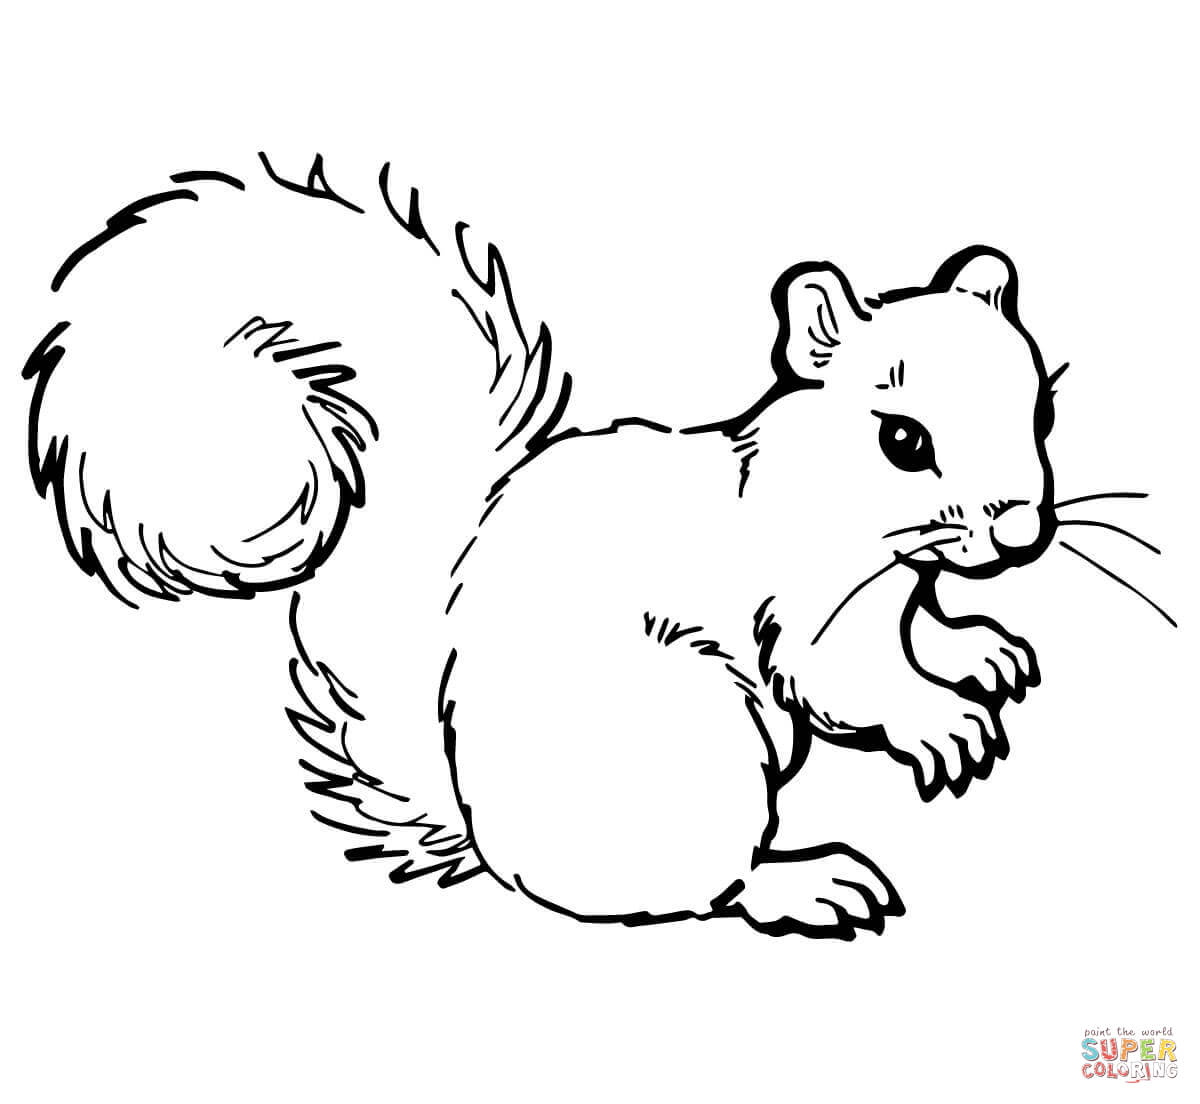 Red Squirrel coloring #5, Download drawings